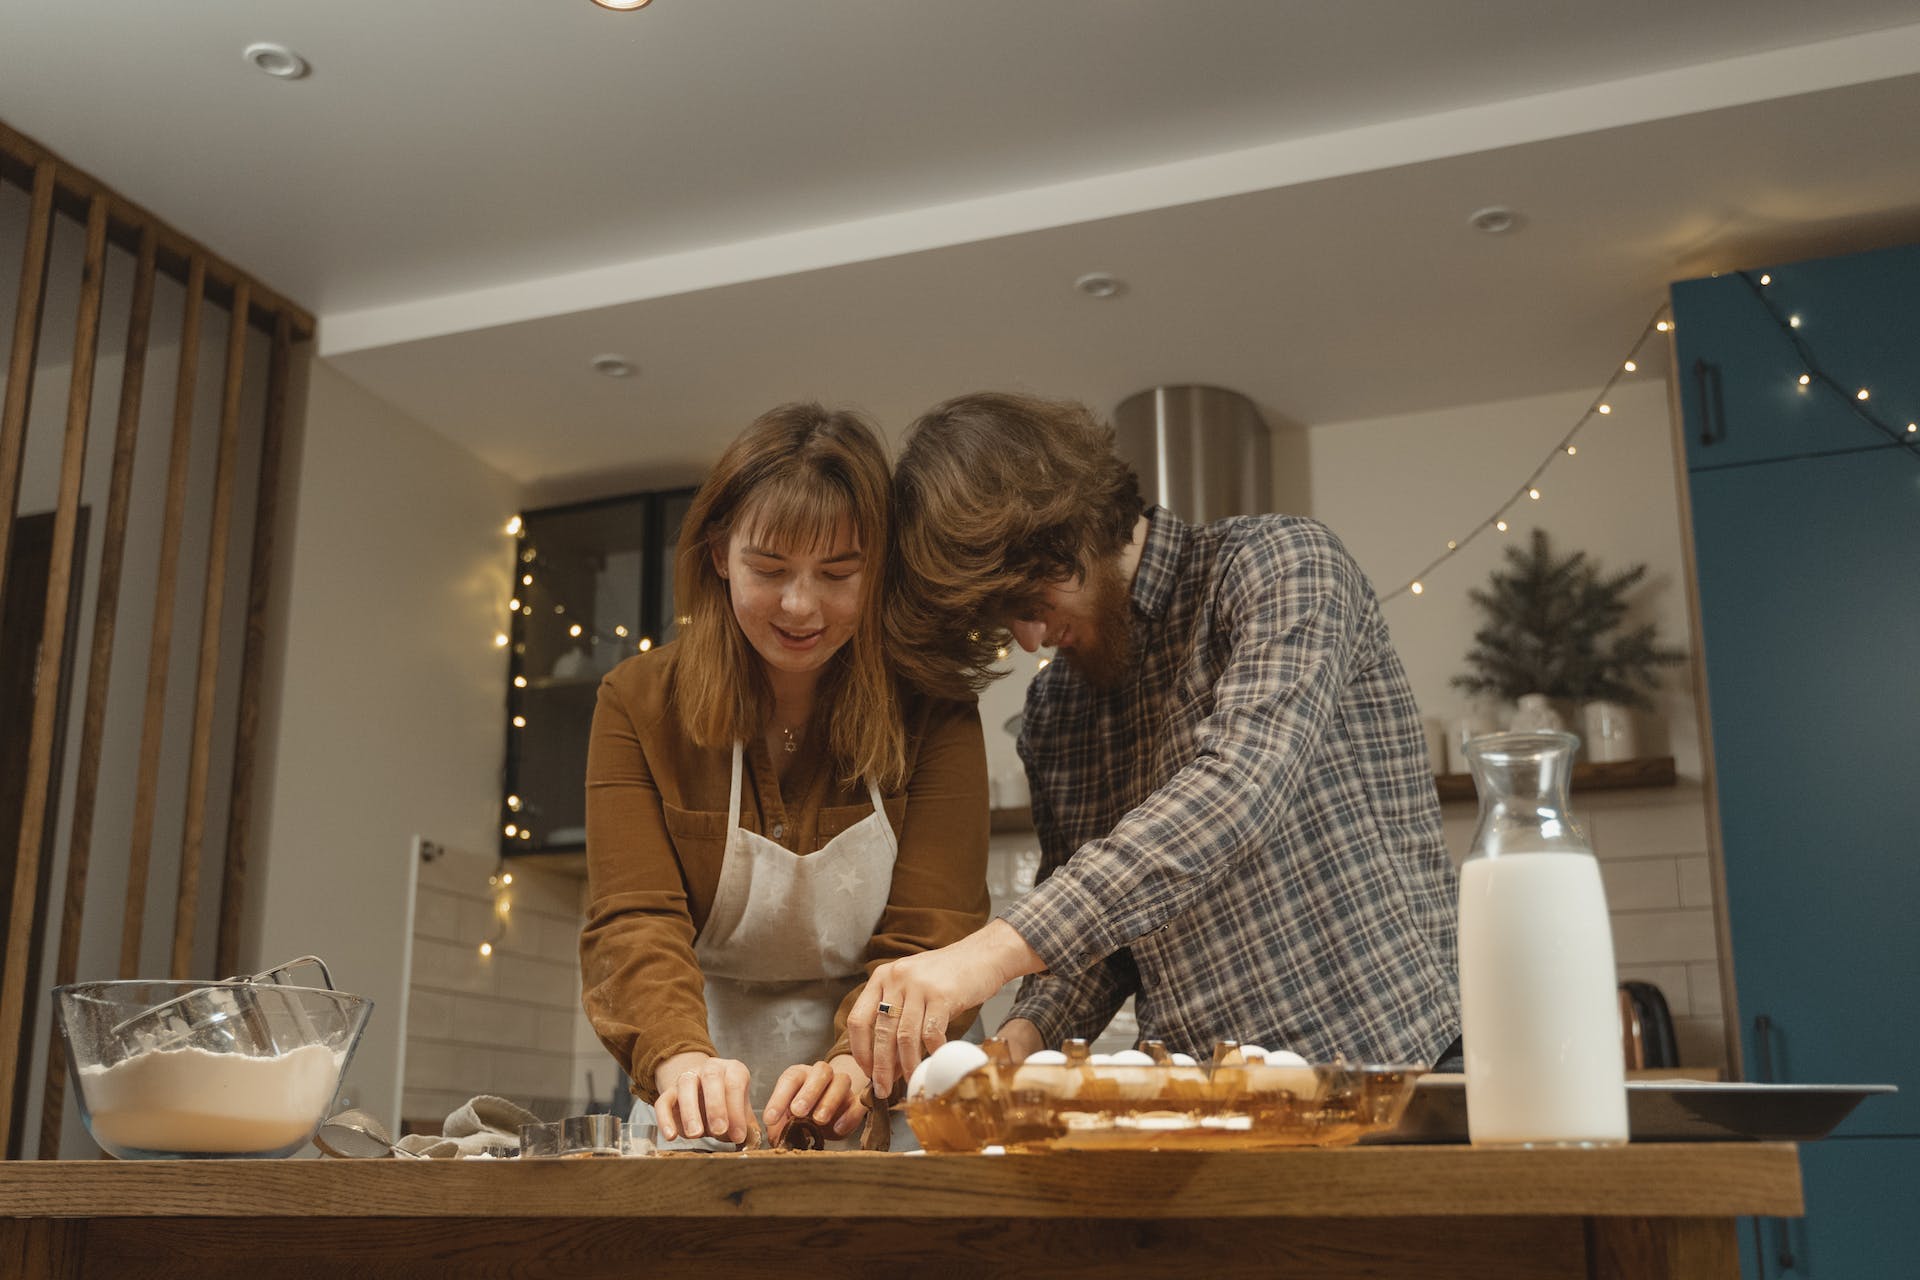 A husband helping his wife in the kitchen | Source: Pexels